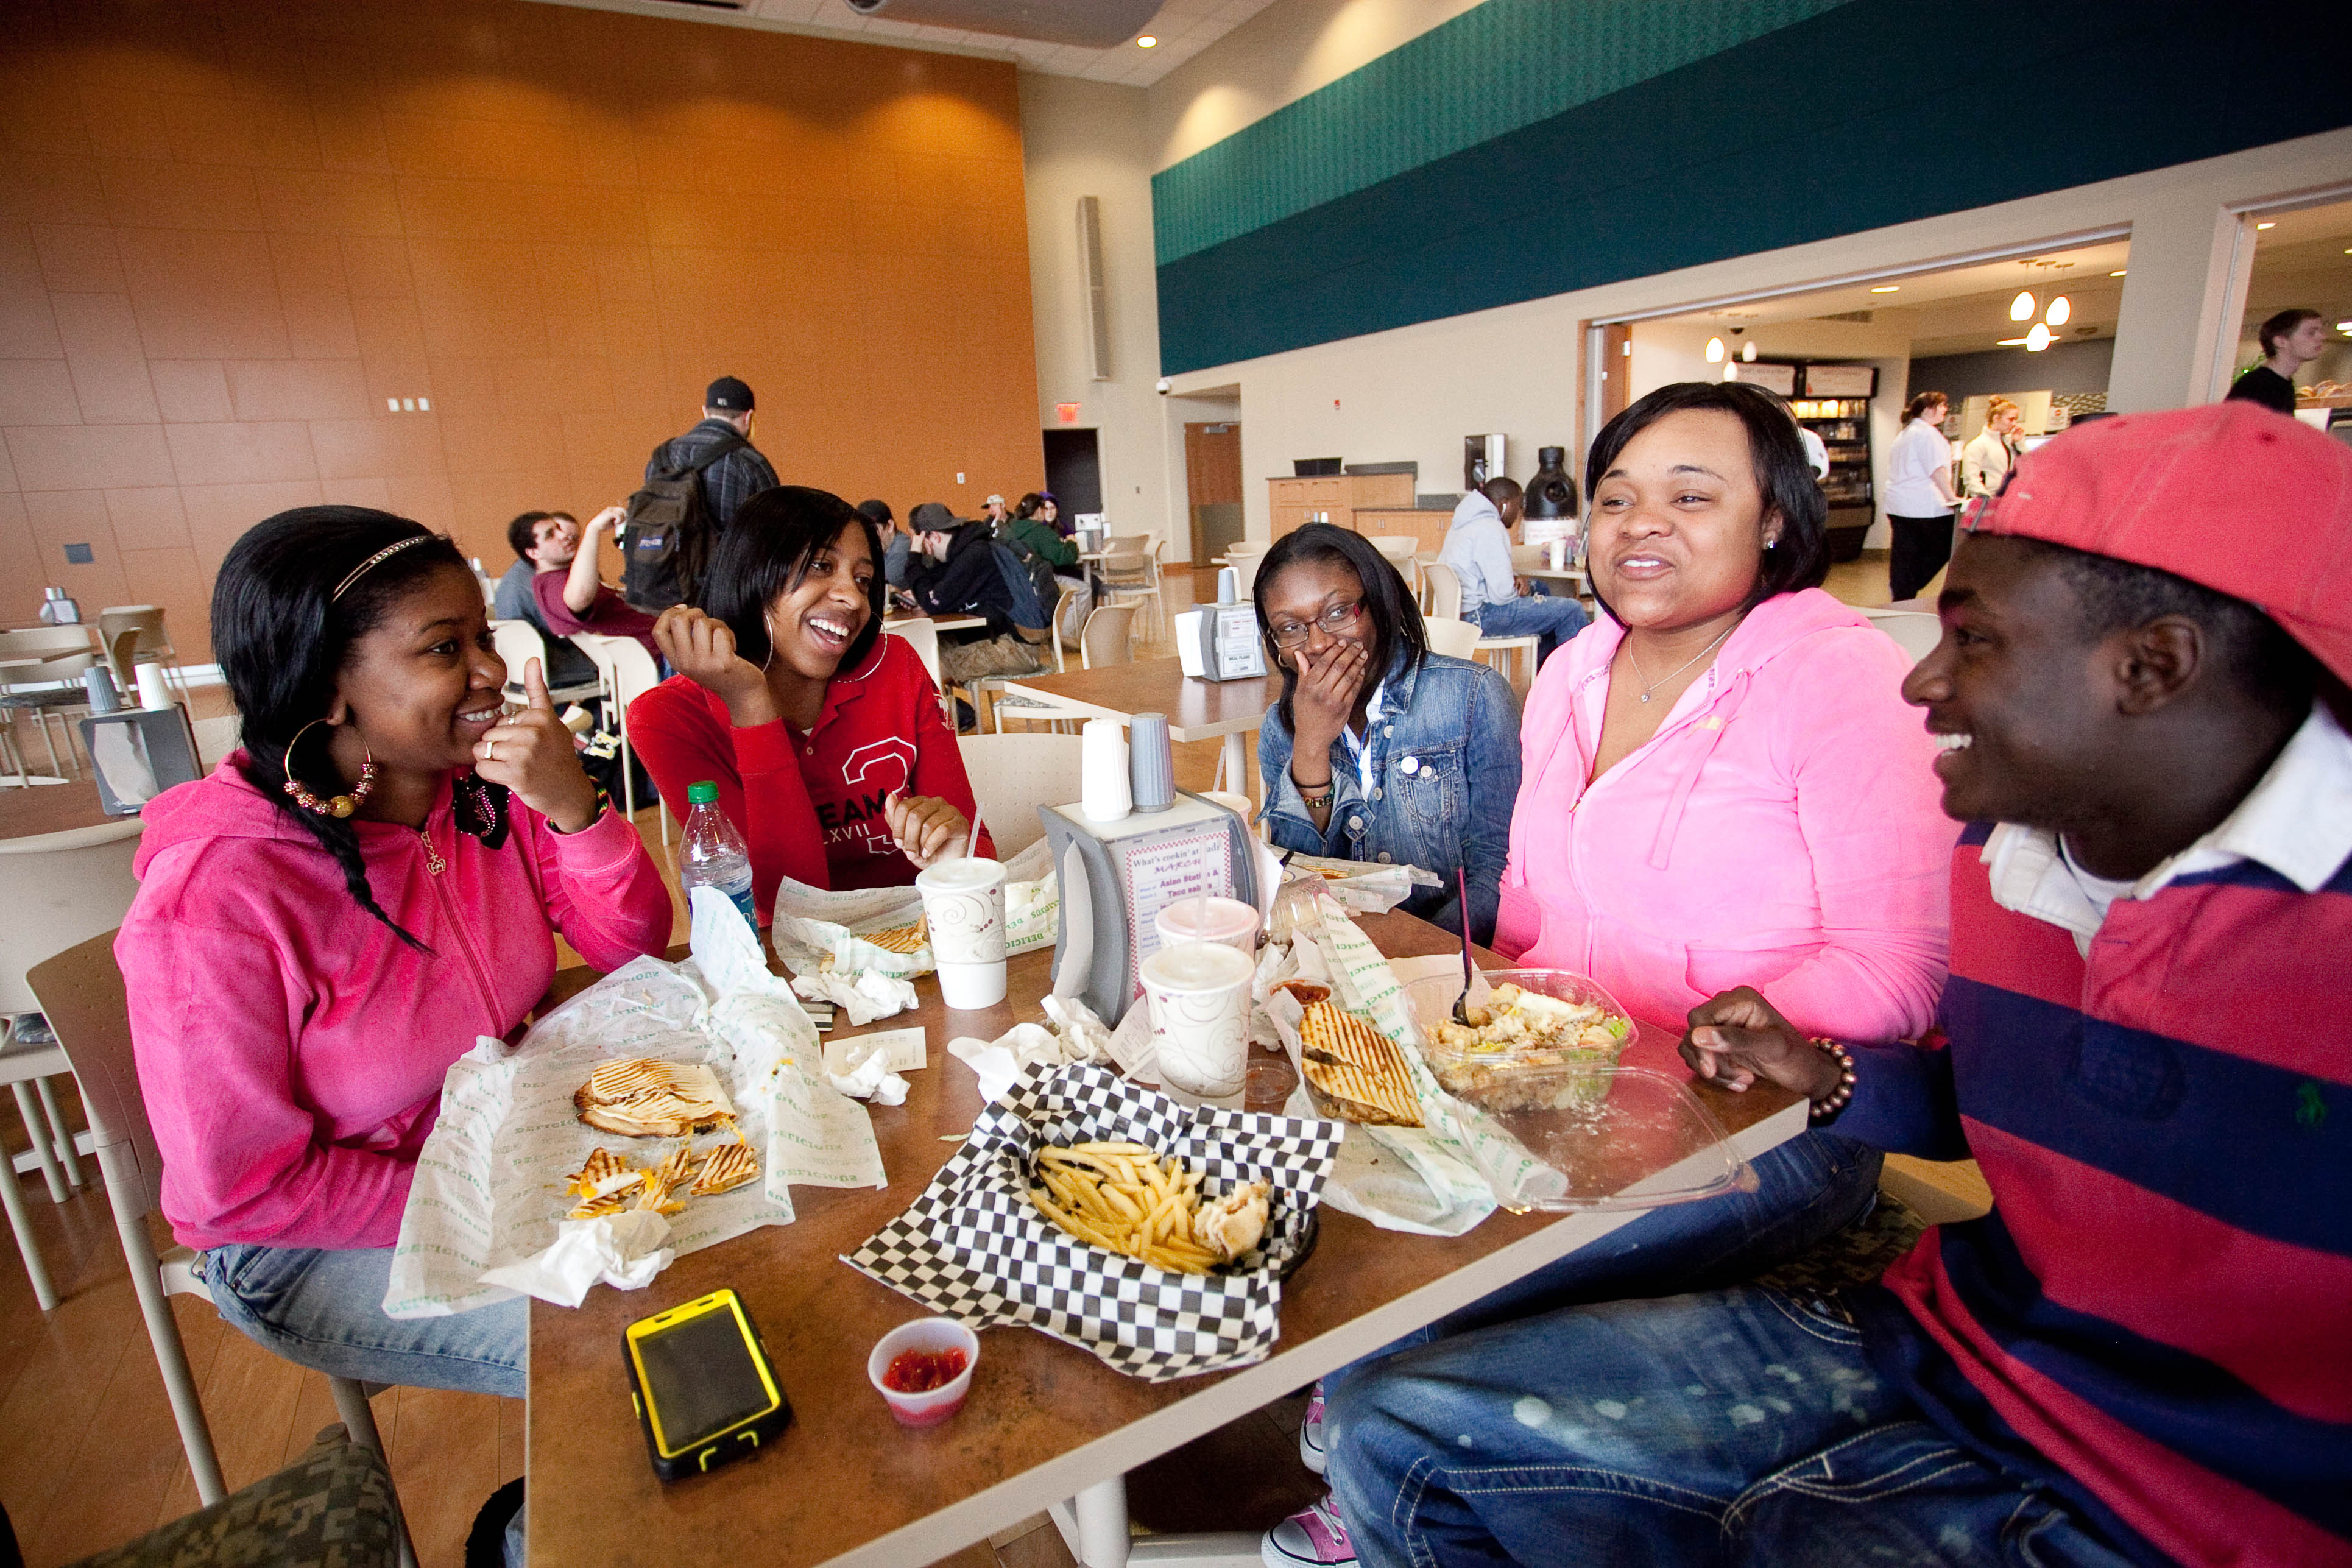 Students enjoying lunch in Farrell Commons